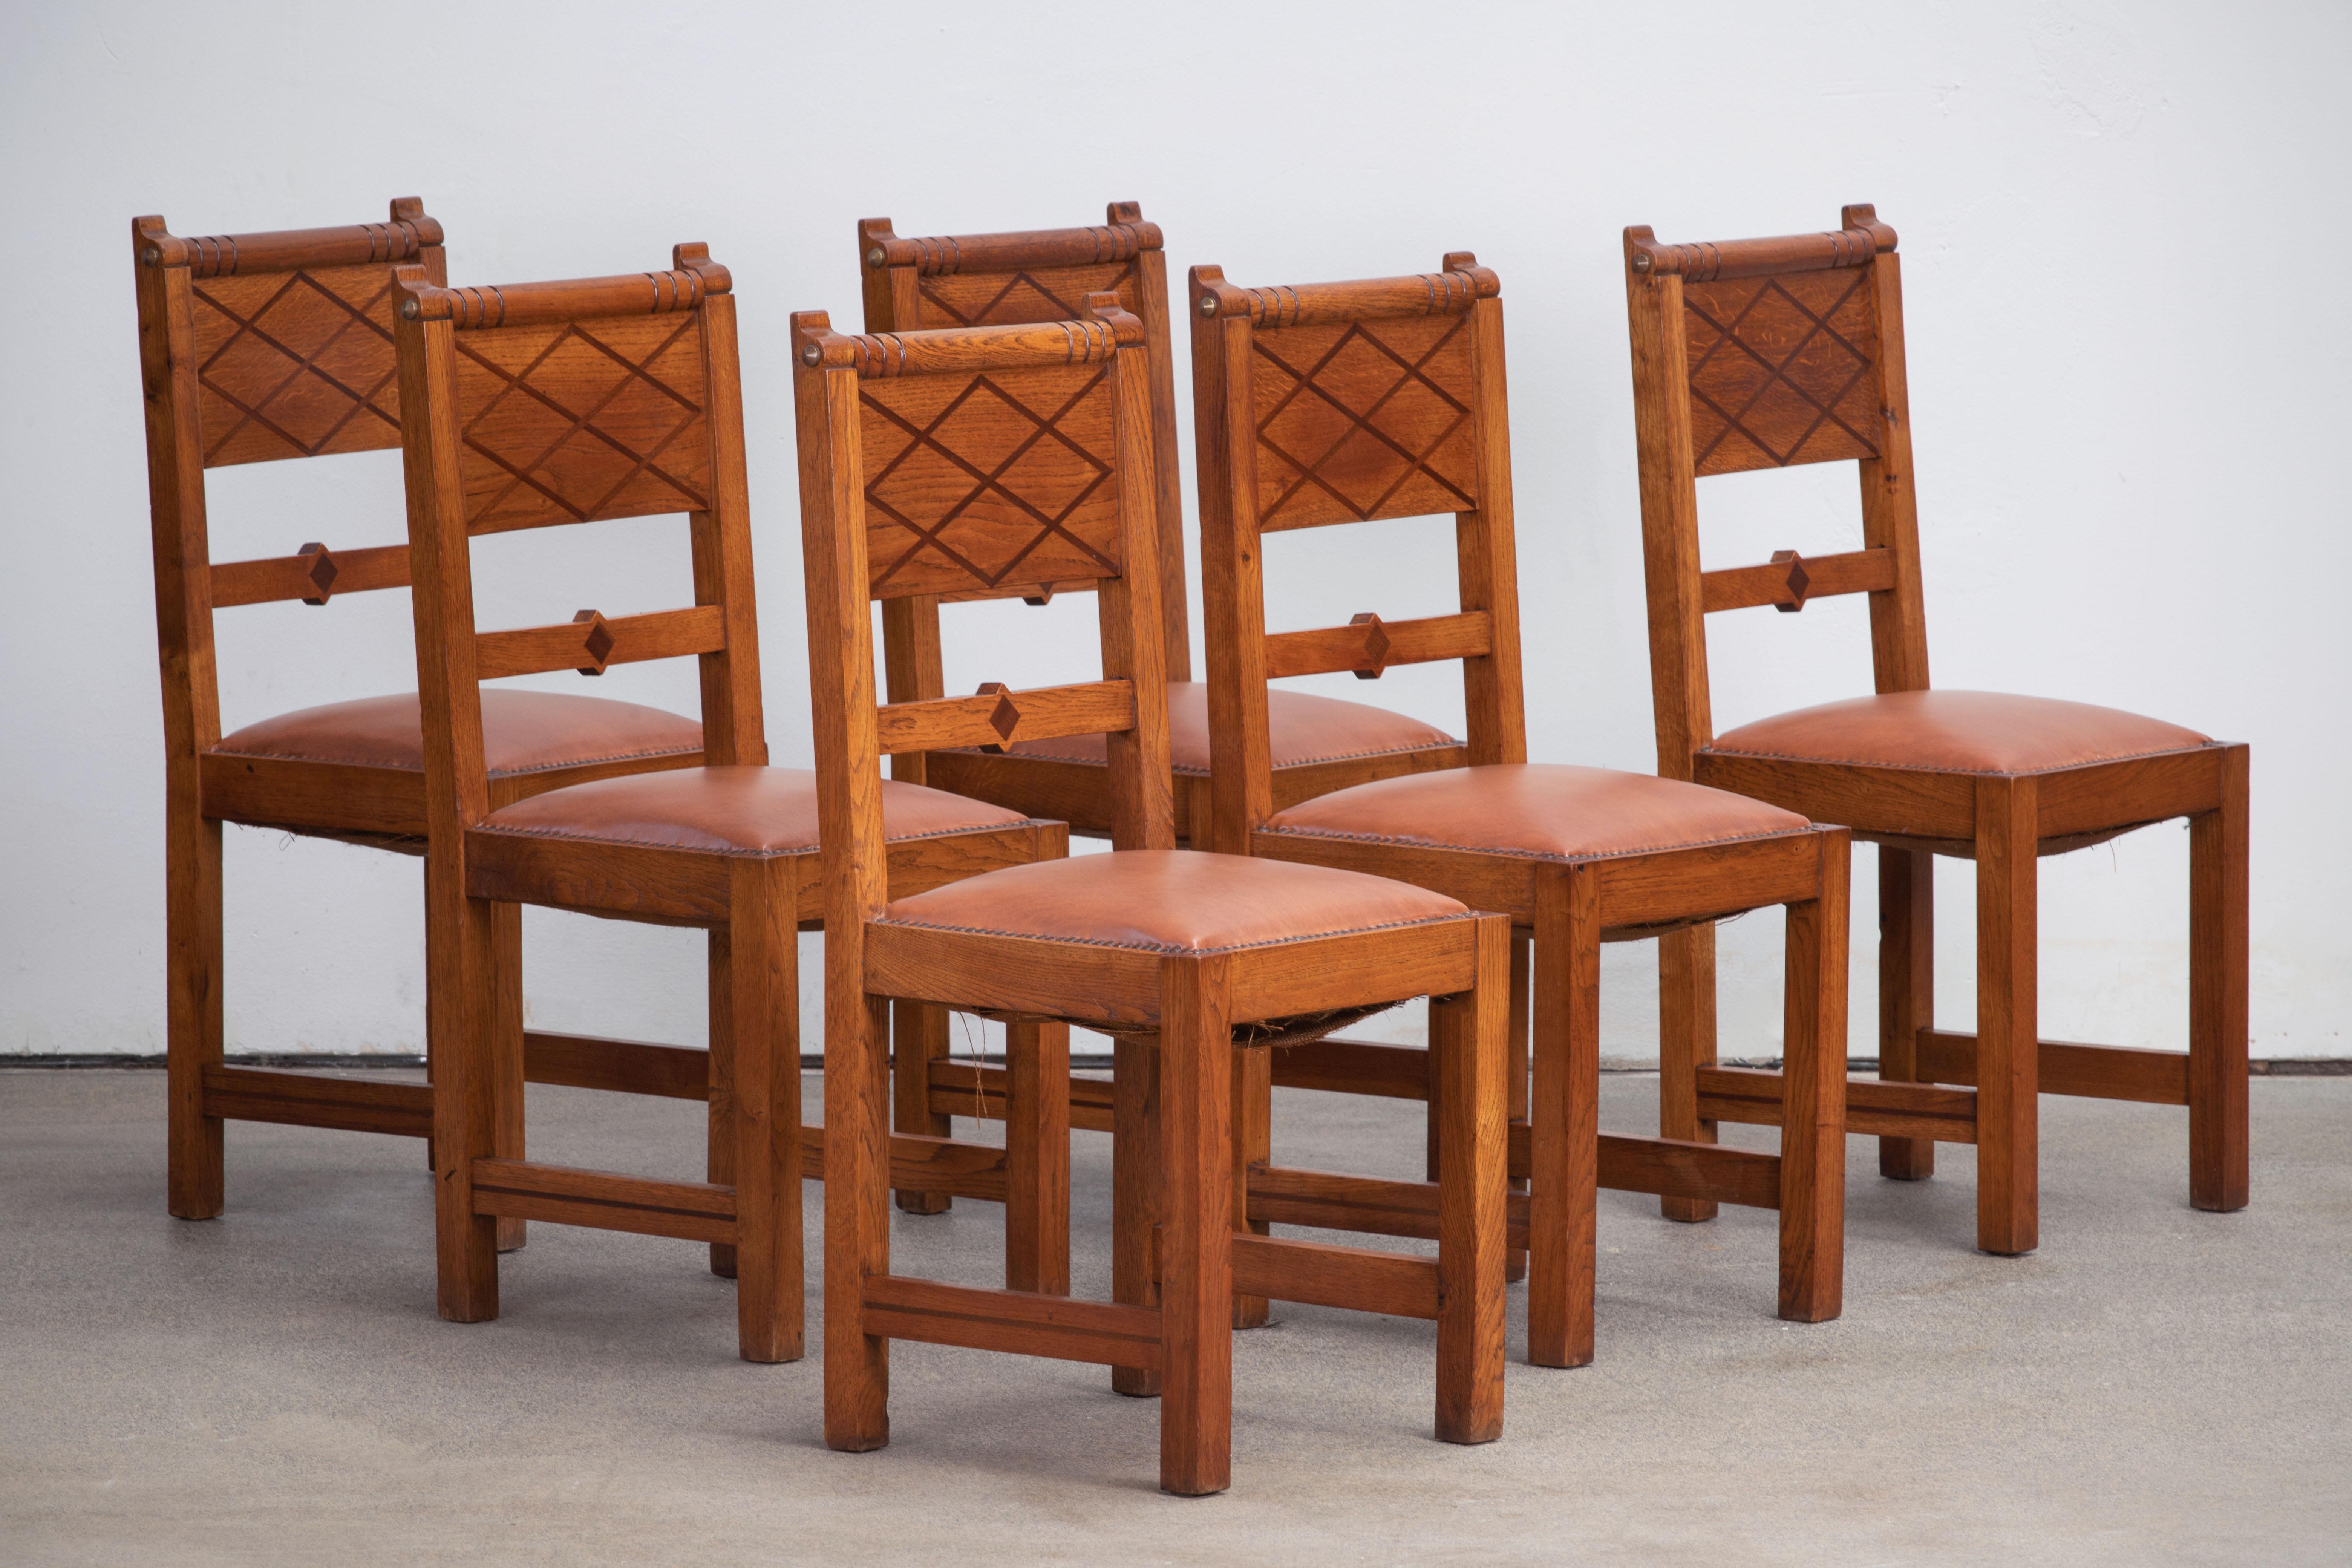 This set of six French Art Deco dining chairs in solid oak was created in the 1930s, in a small workshop in the town of Albi, southern France. It is in this same town of Albi that we had the chance to unearth these chairs. (The chairs have probably